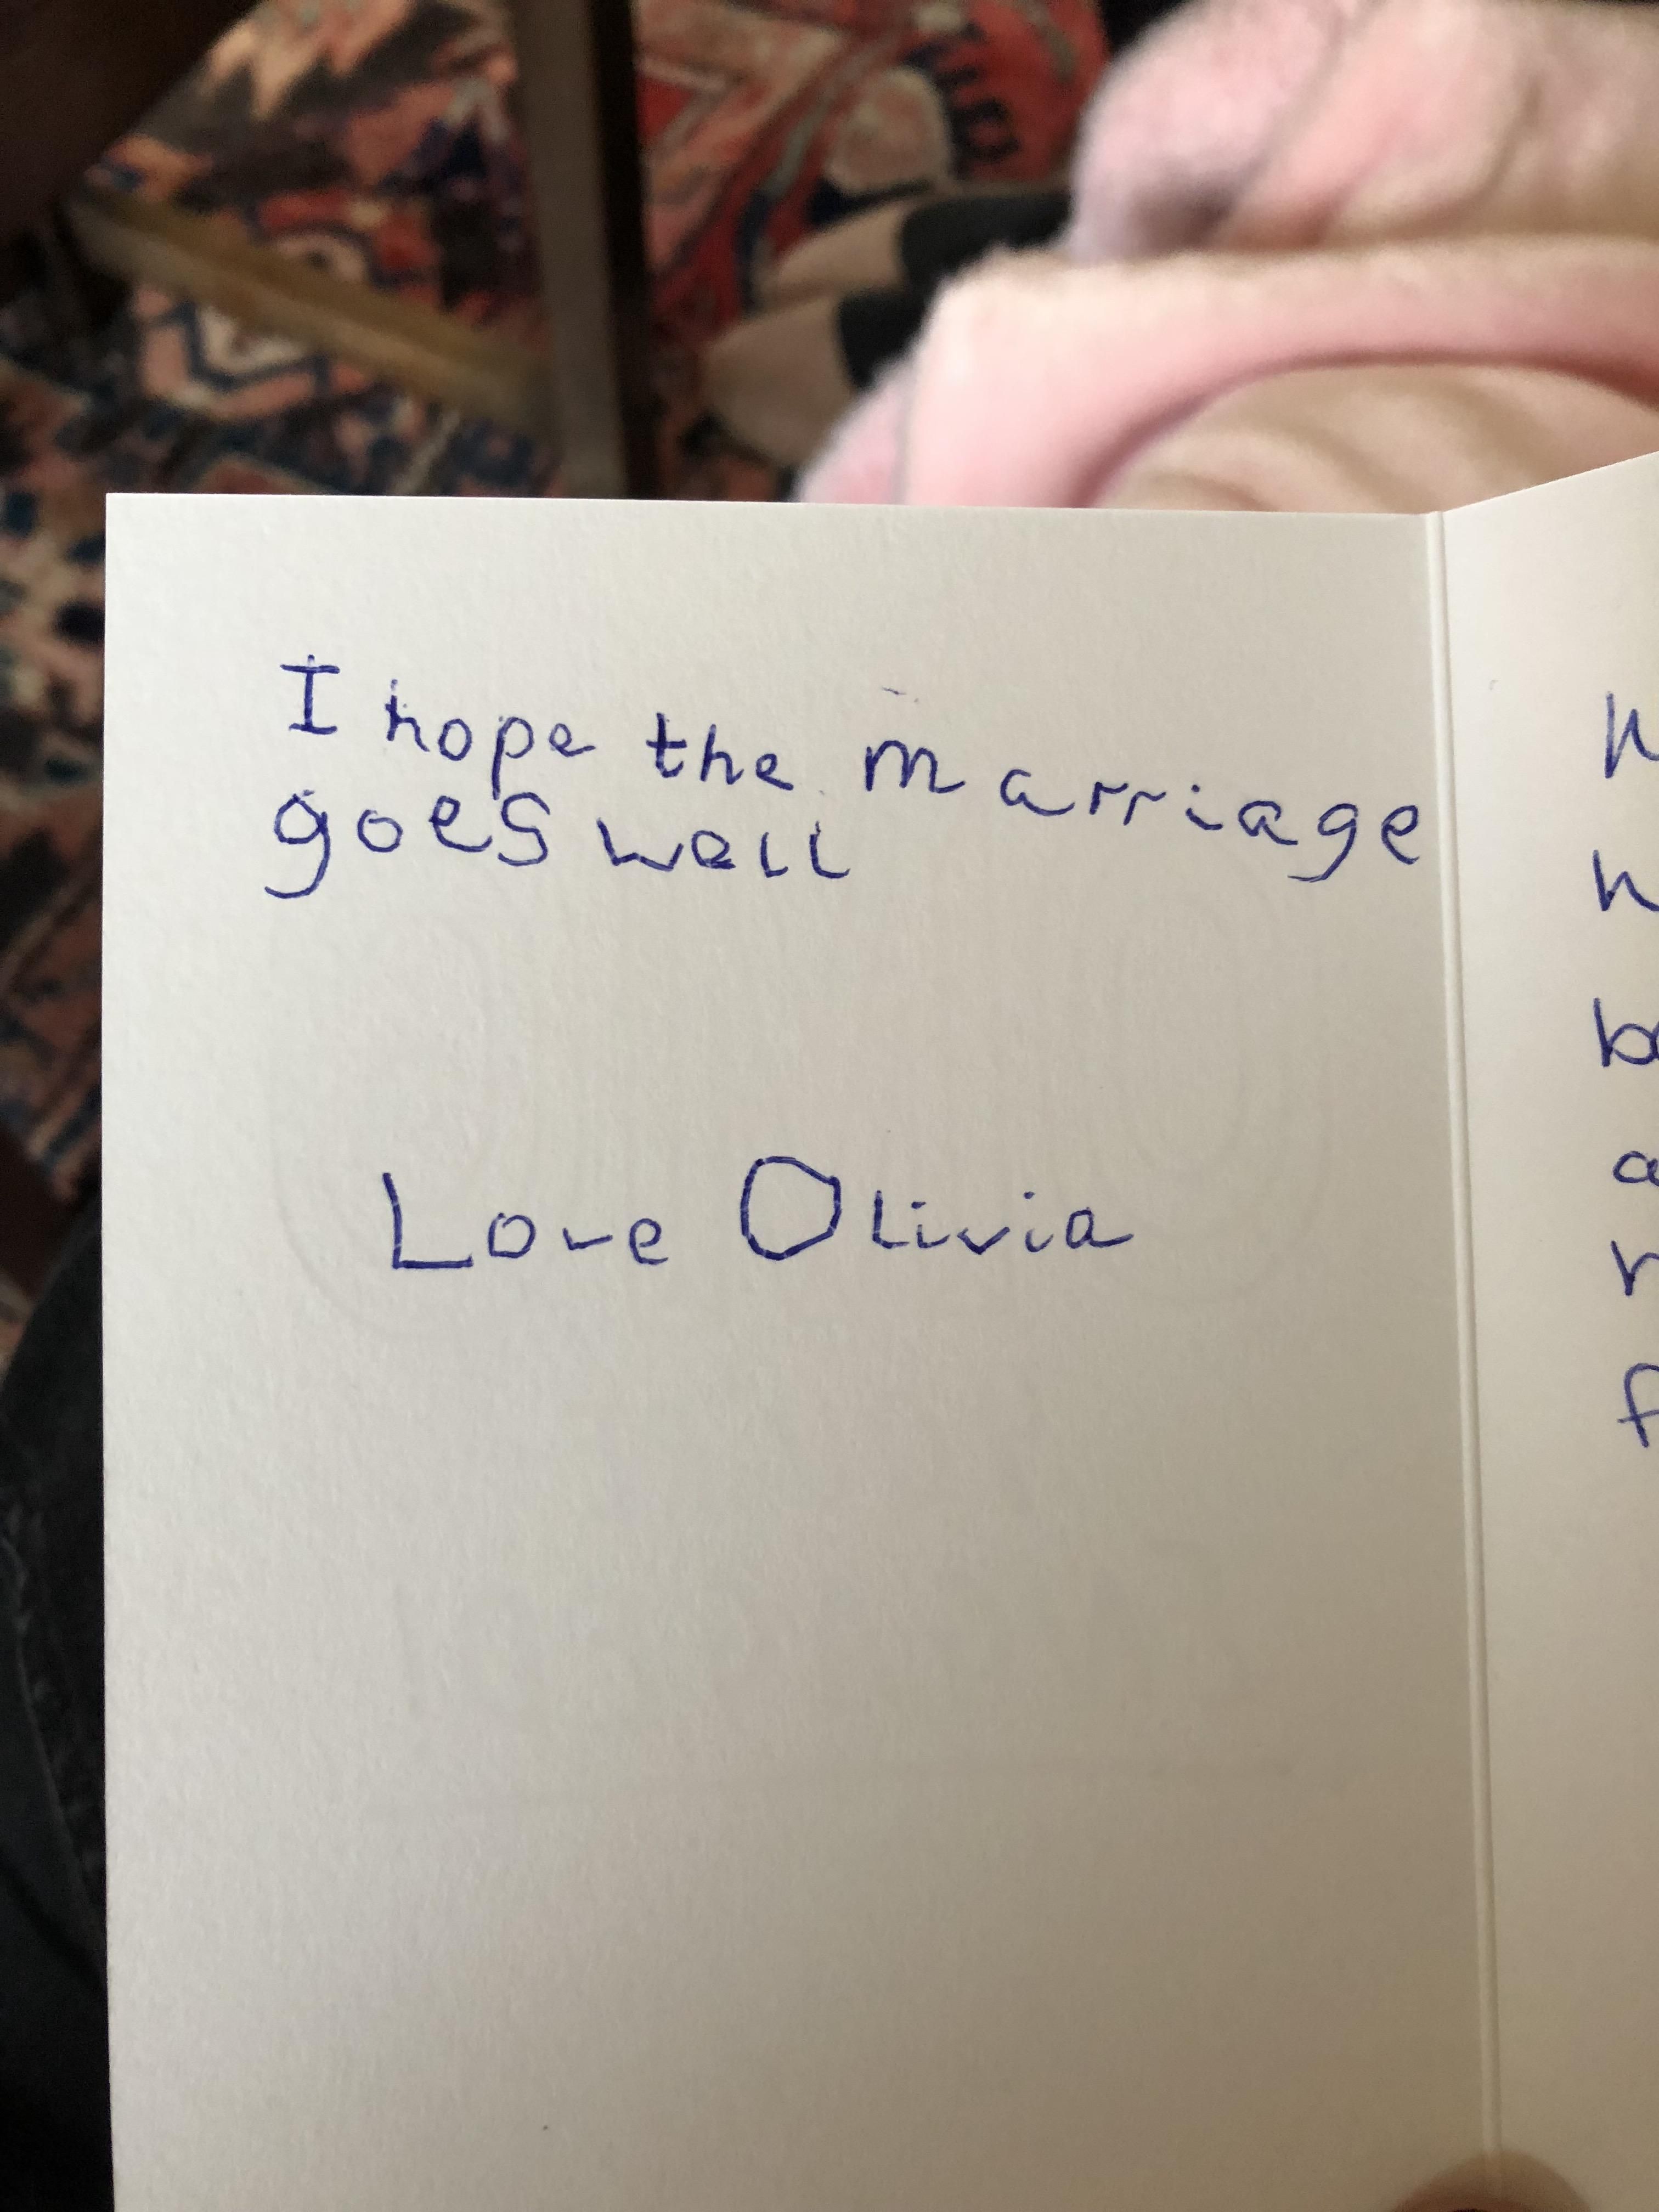 My best friends kid signed my engagement card. I hope it does too, Olivia.